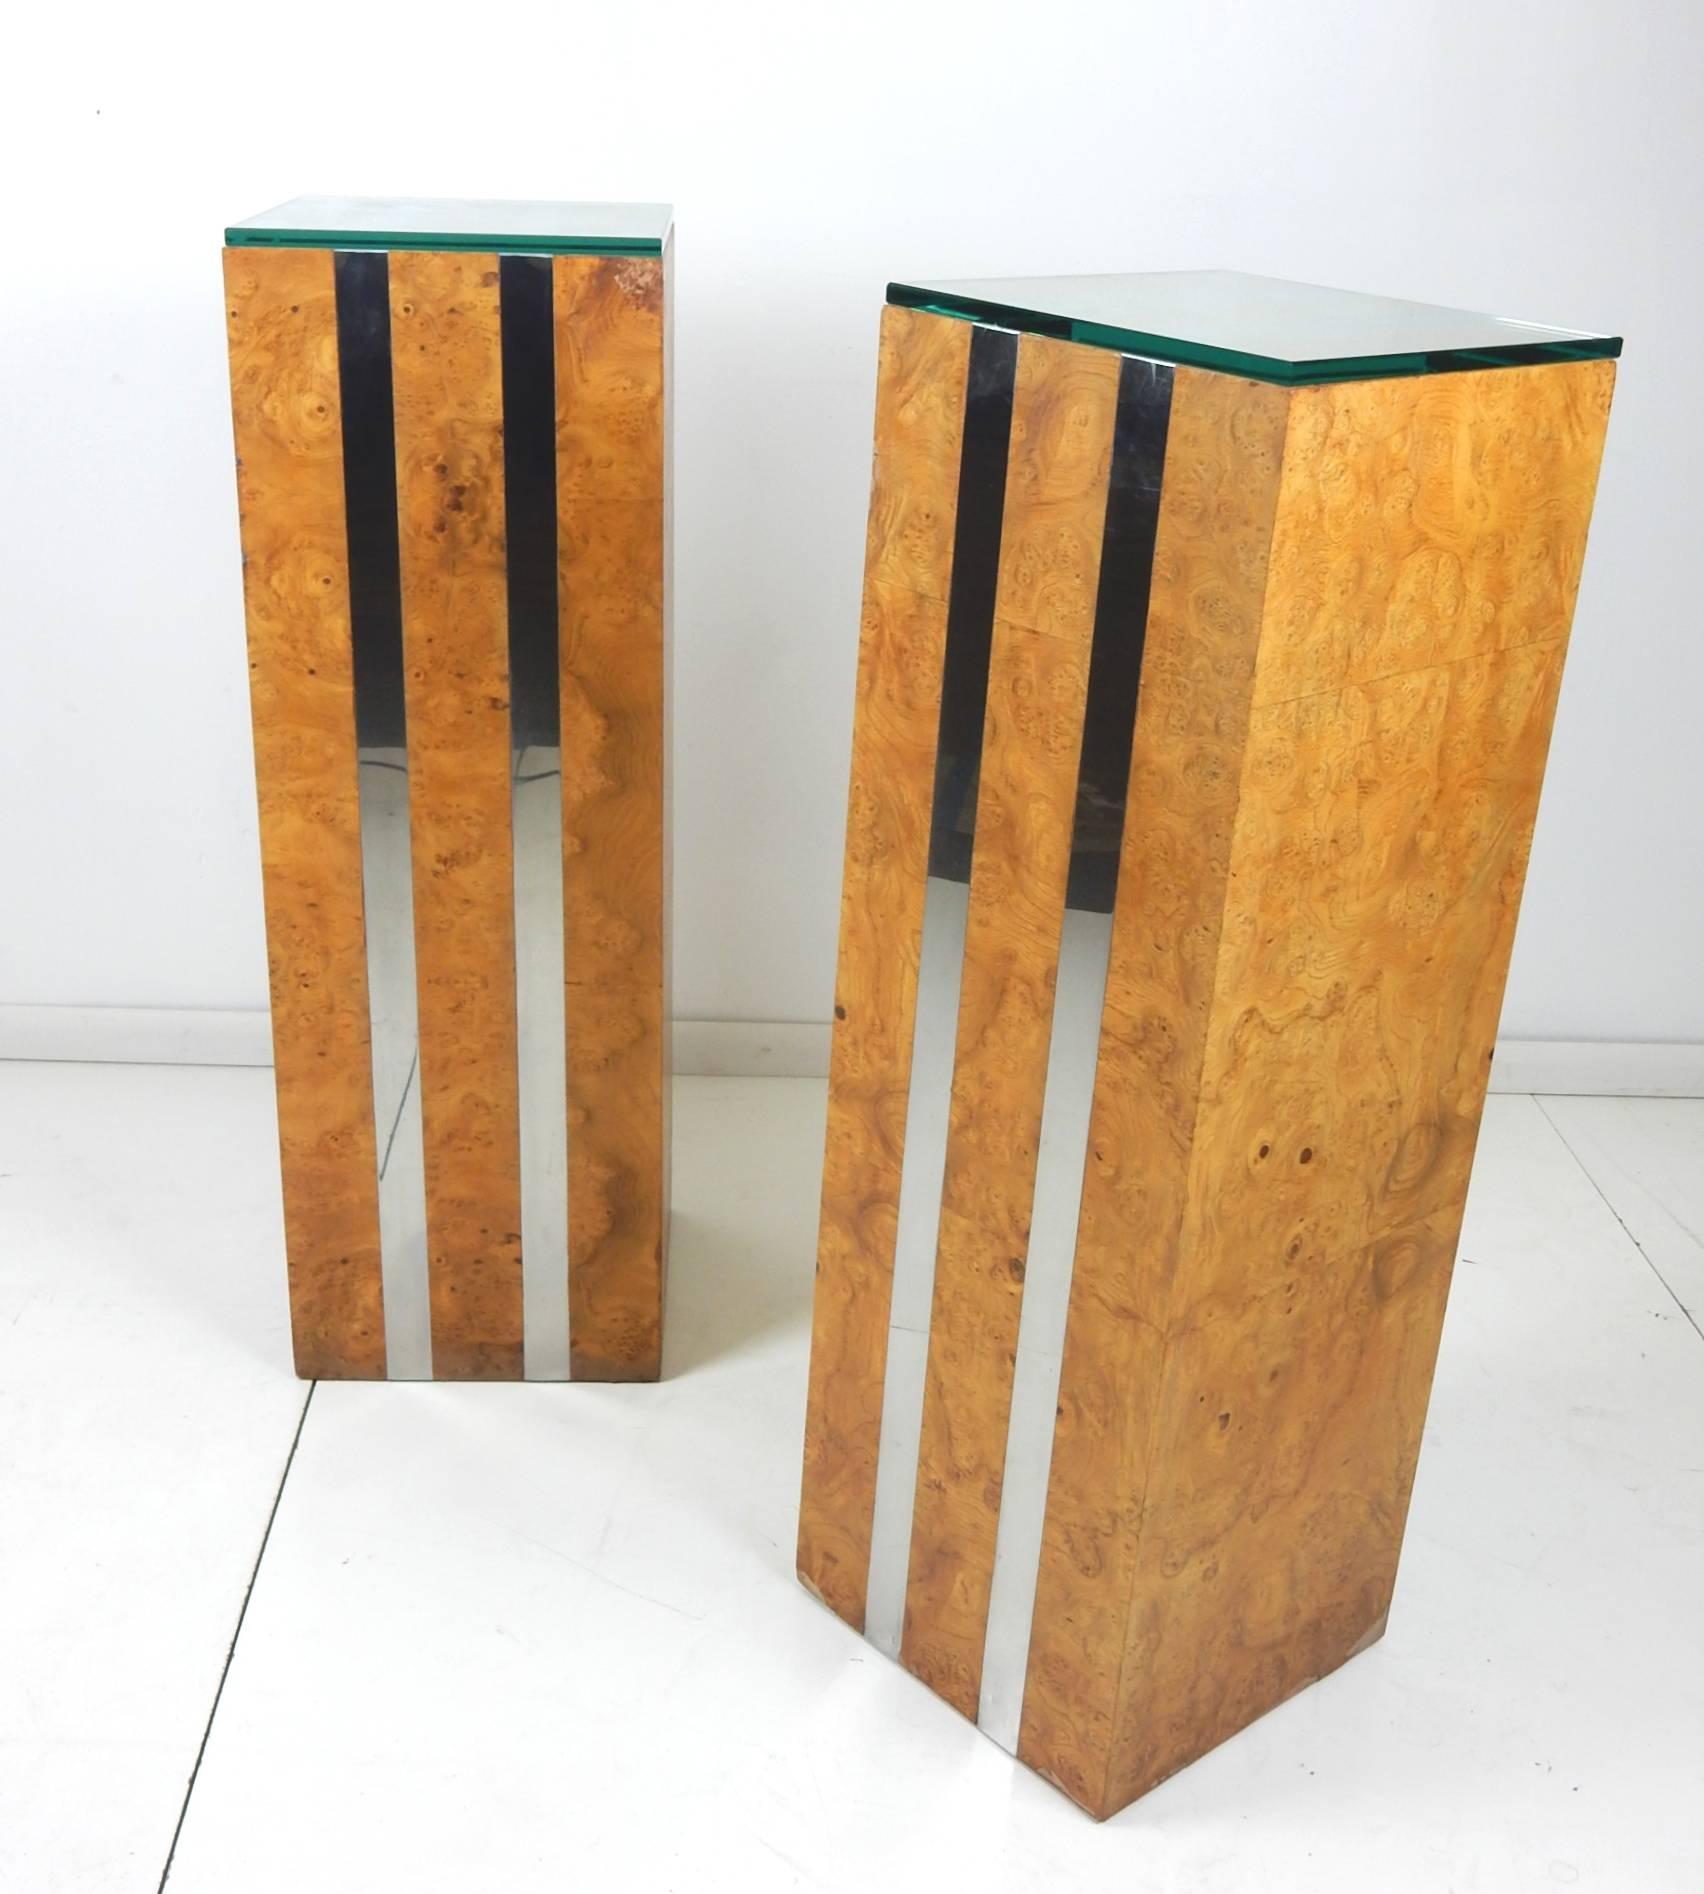 Pair of olive burl wood pedestals with banded chrome strips down sides and top. Measure: 1/2 thick green glass tops,
circa 1970s.